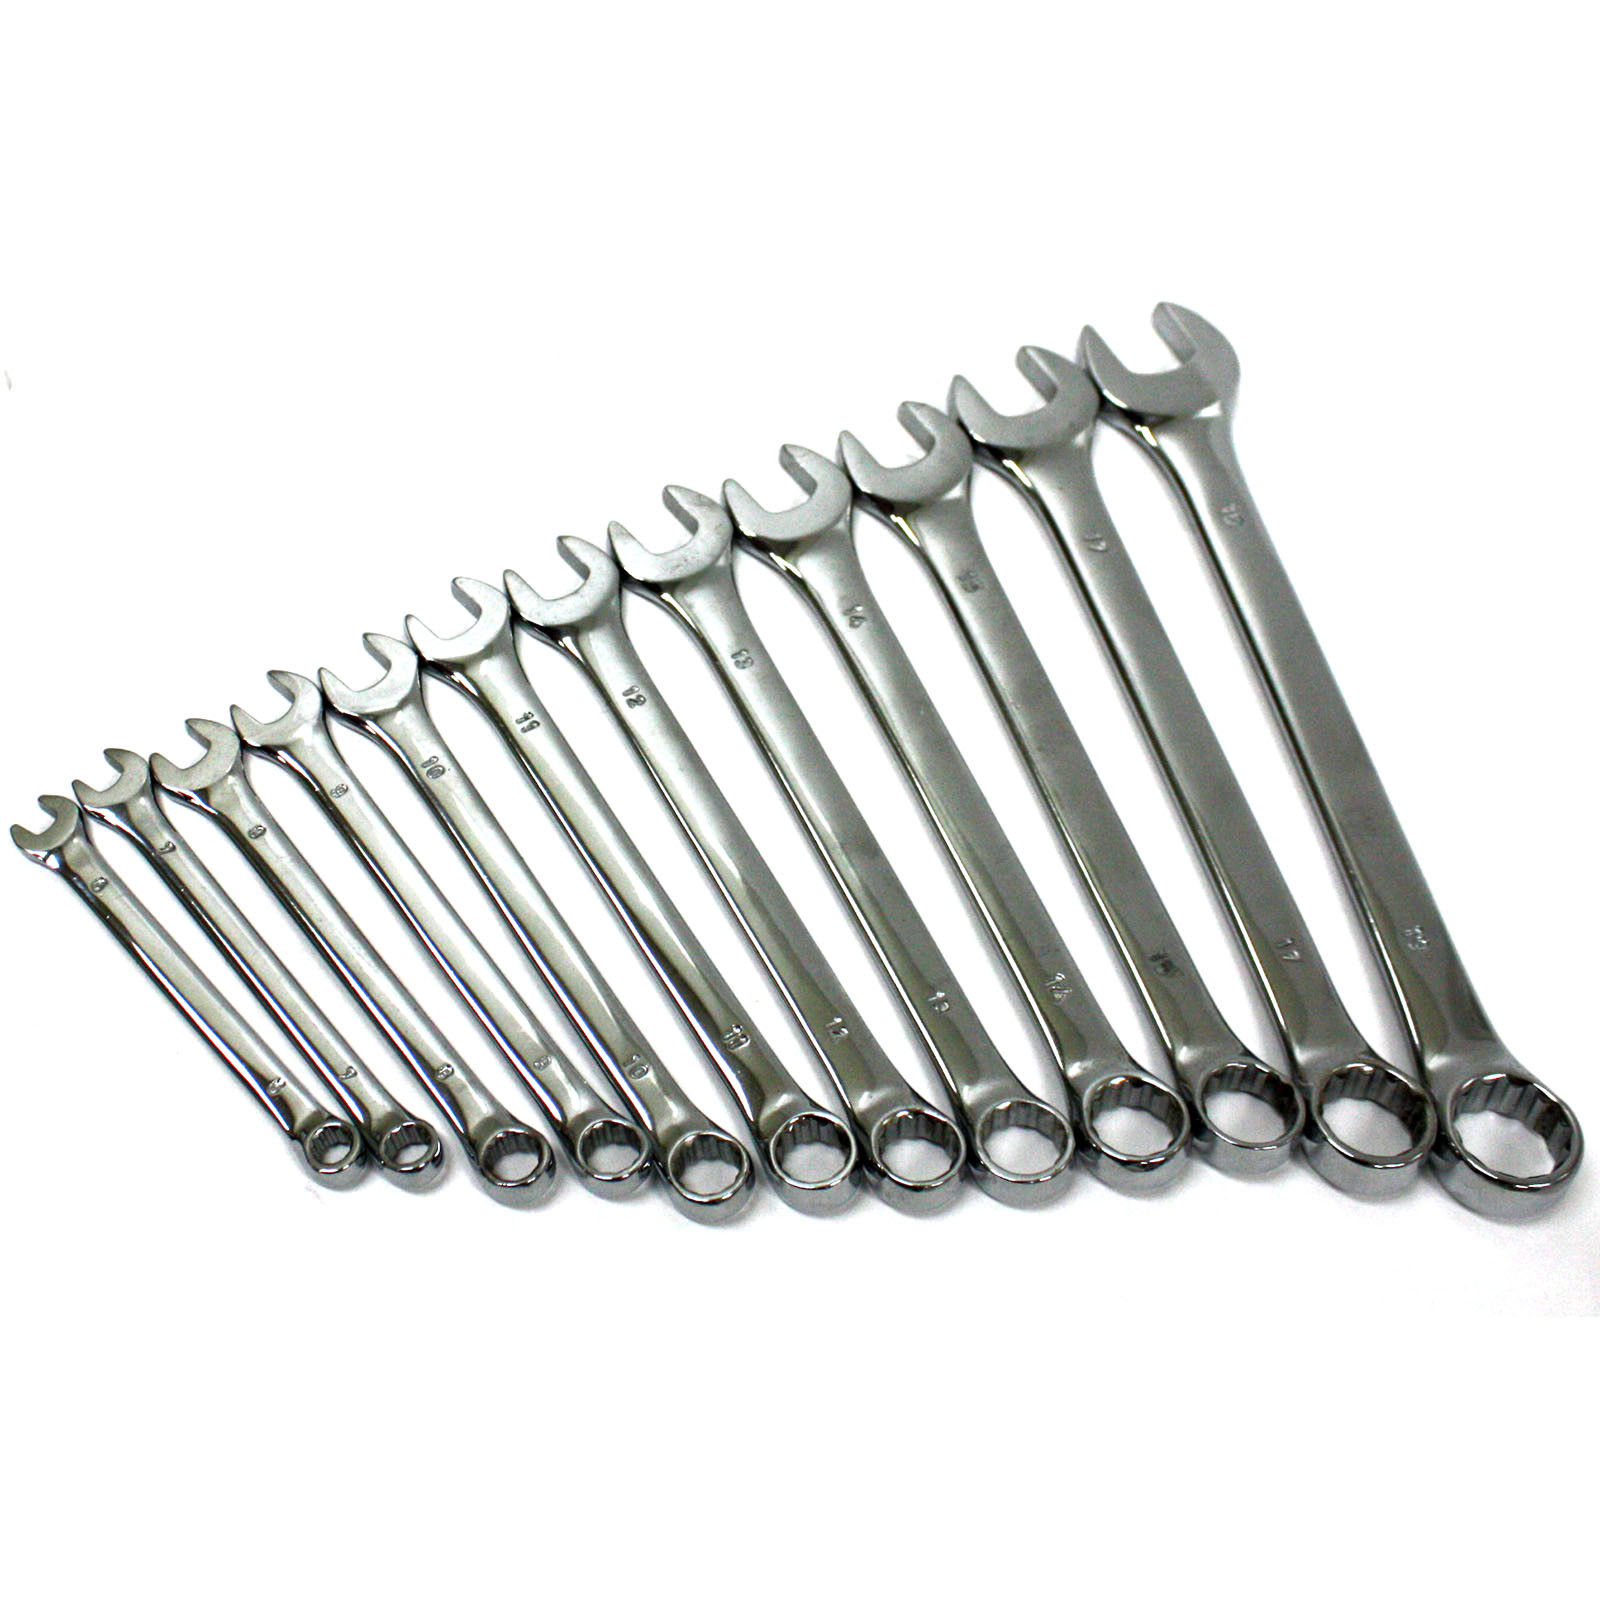 12 Piece Metric Combination Wrench Set